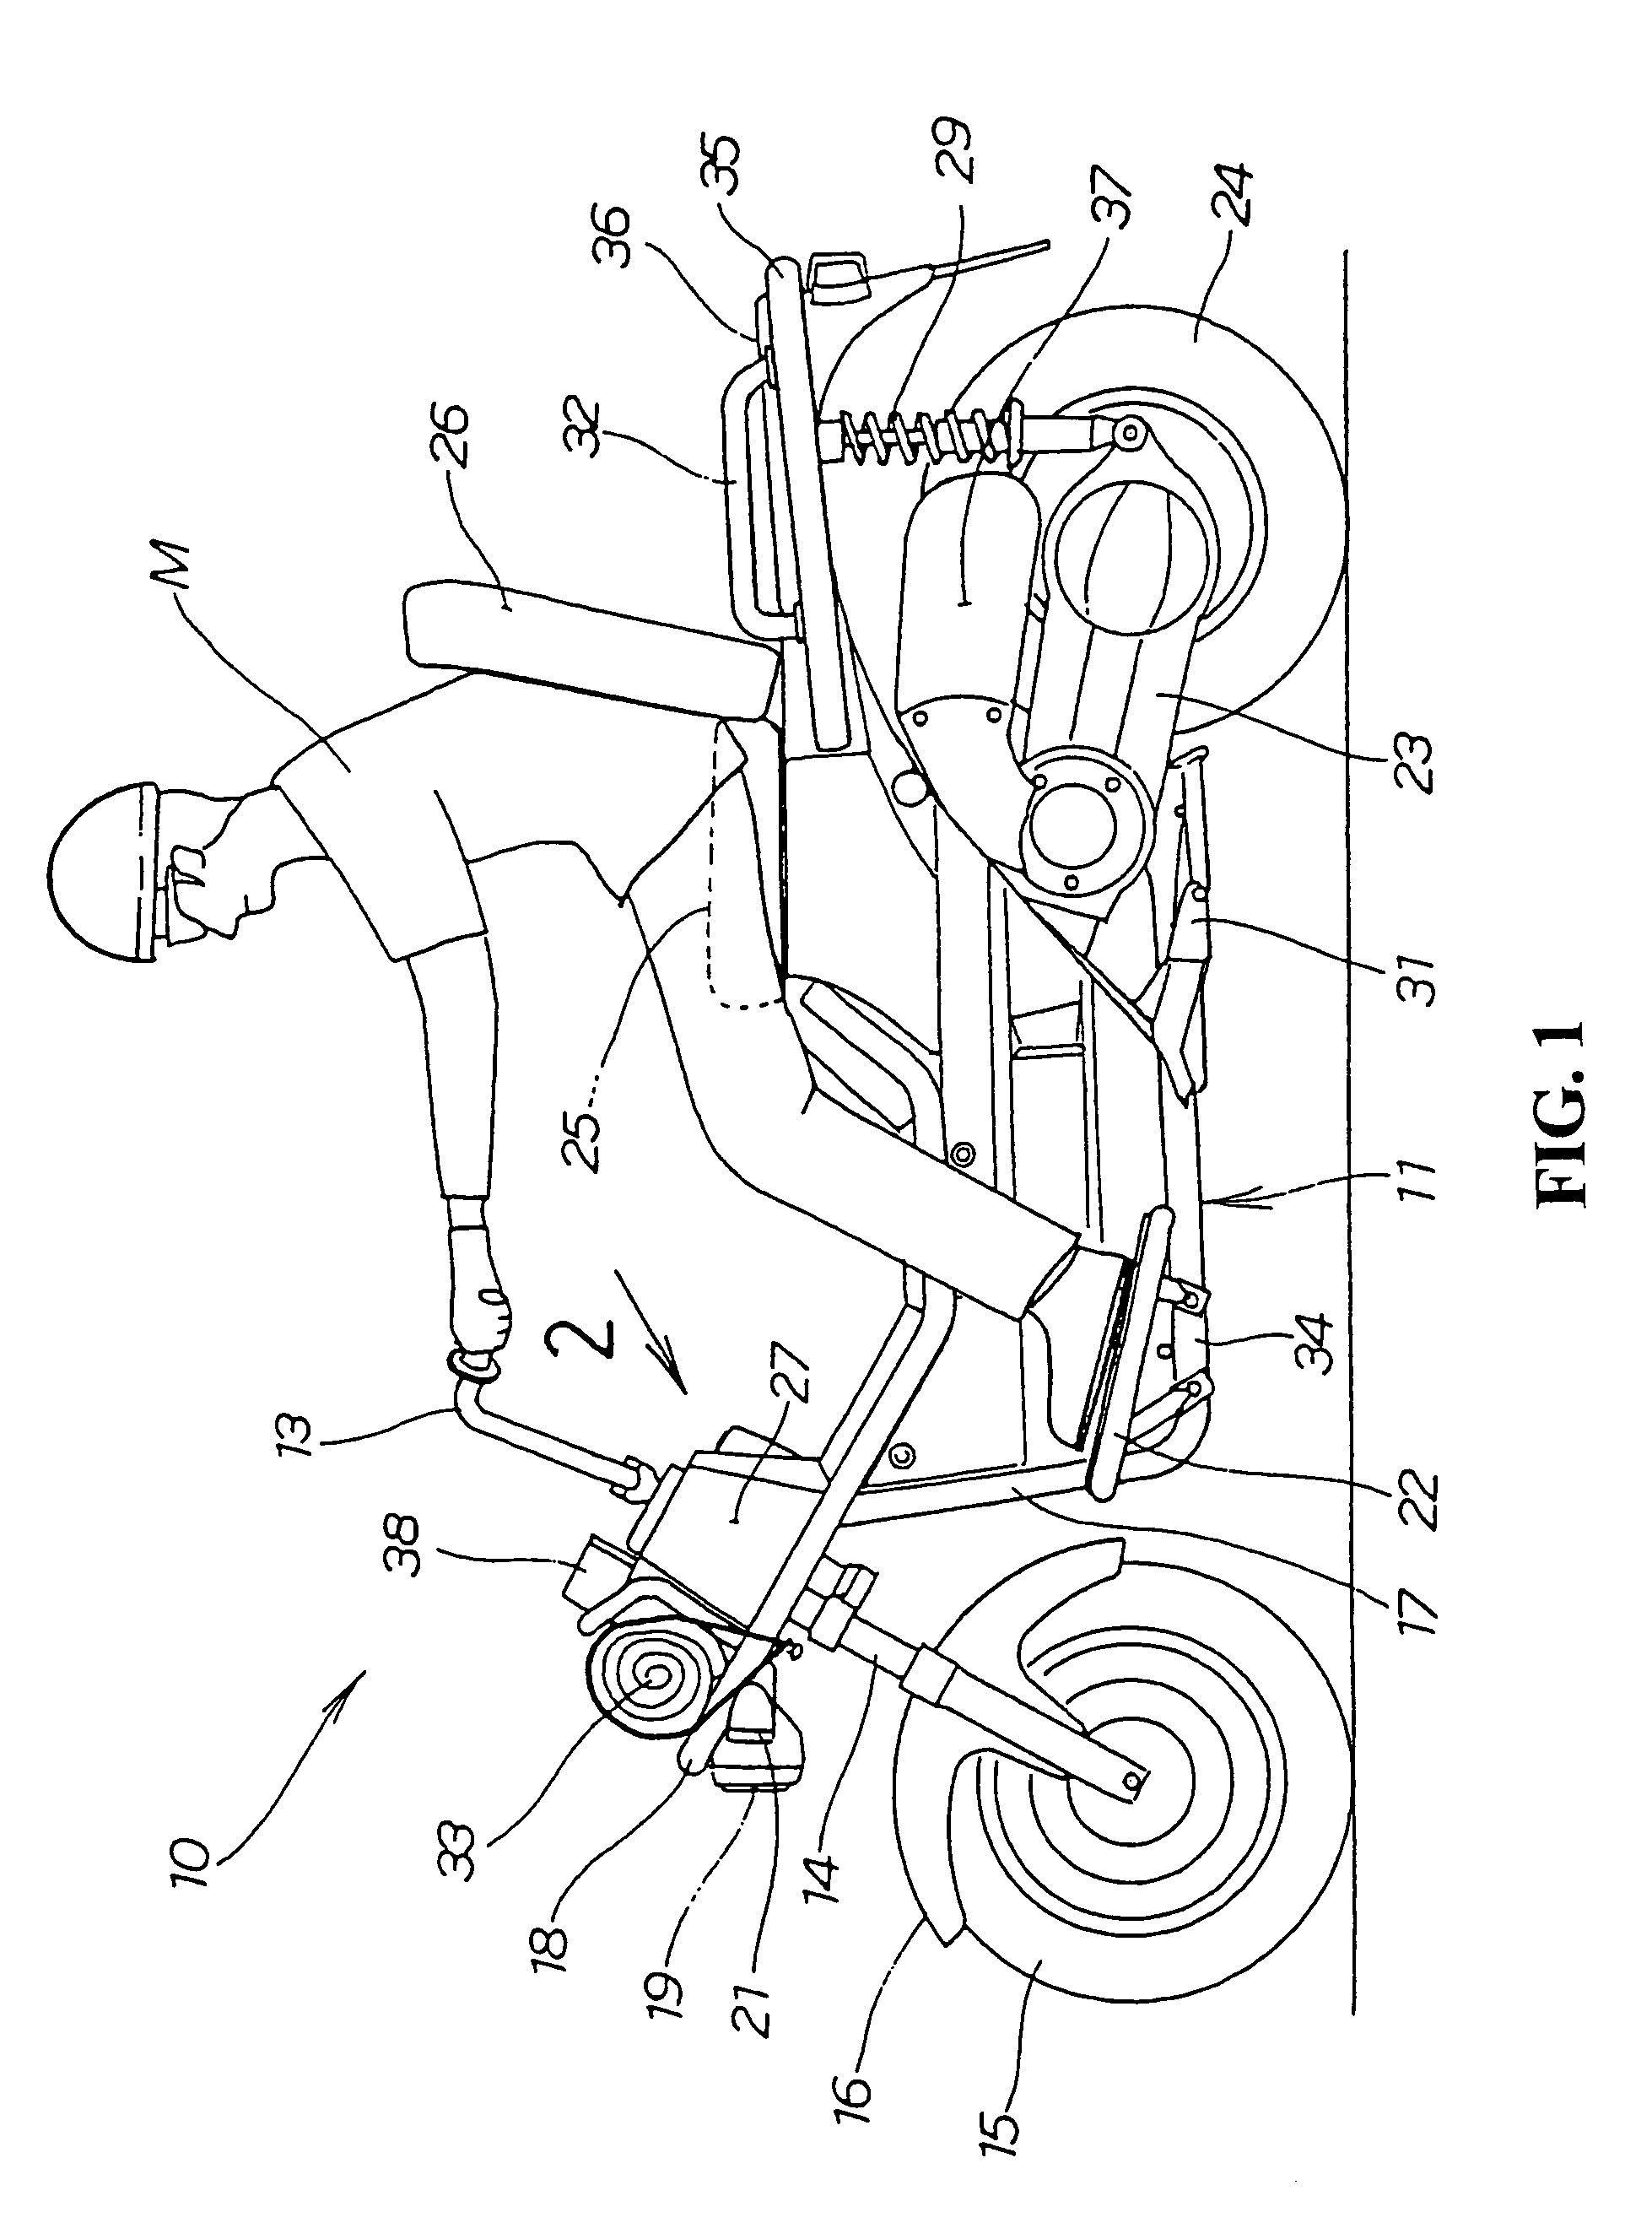 Vehicle provided with key cylinder device equipped with handle lock mechanism